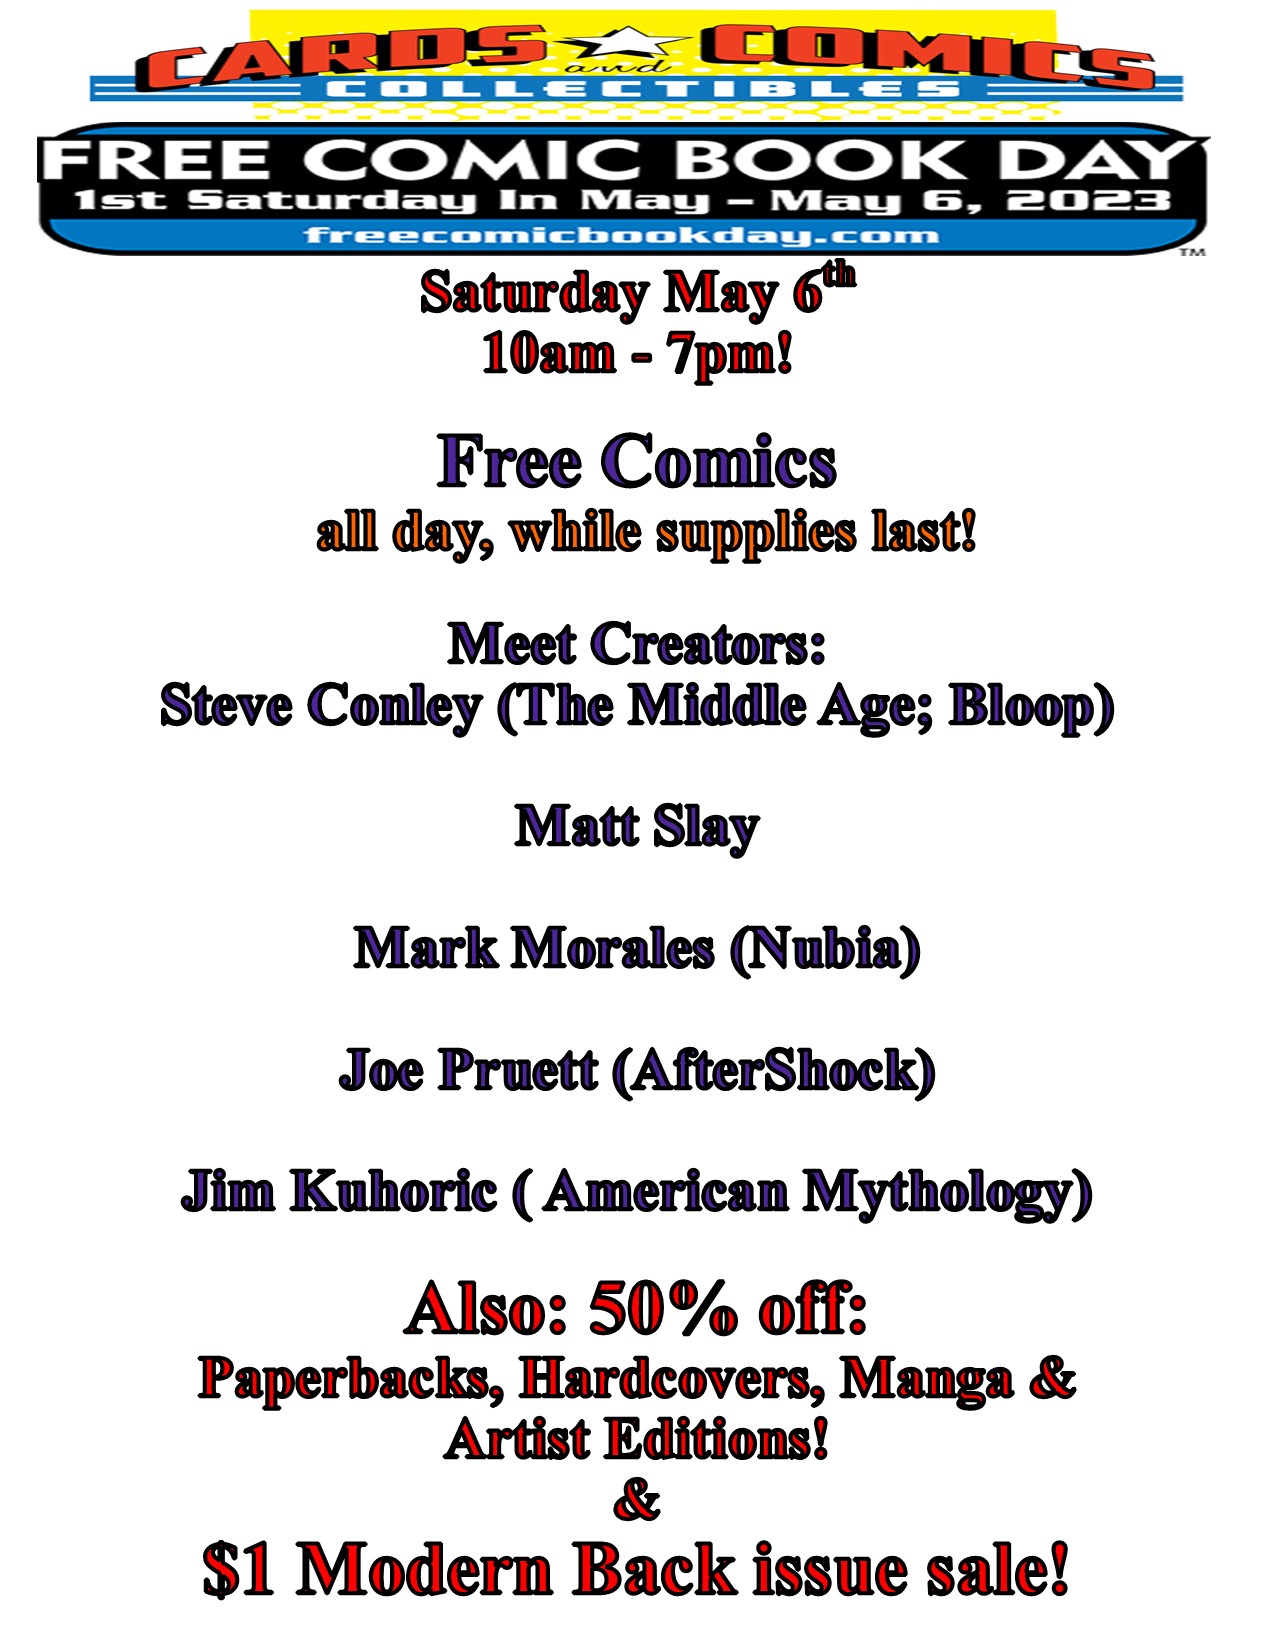 free-comic-book-day-may-6th-cards-comics-collectibles